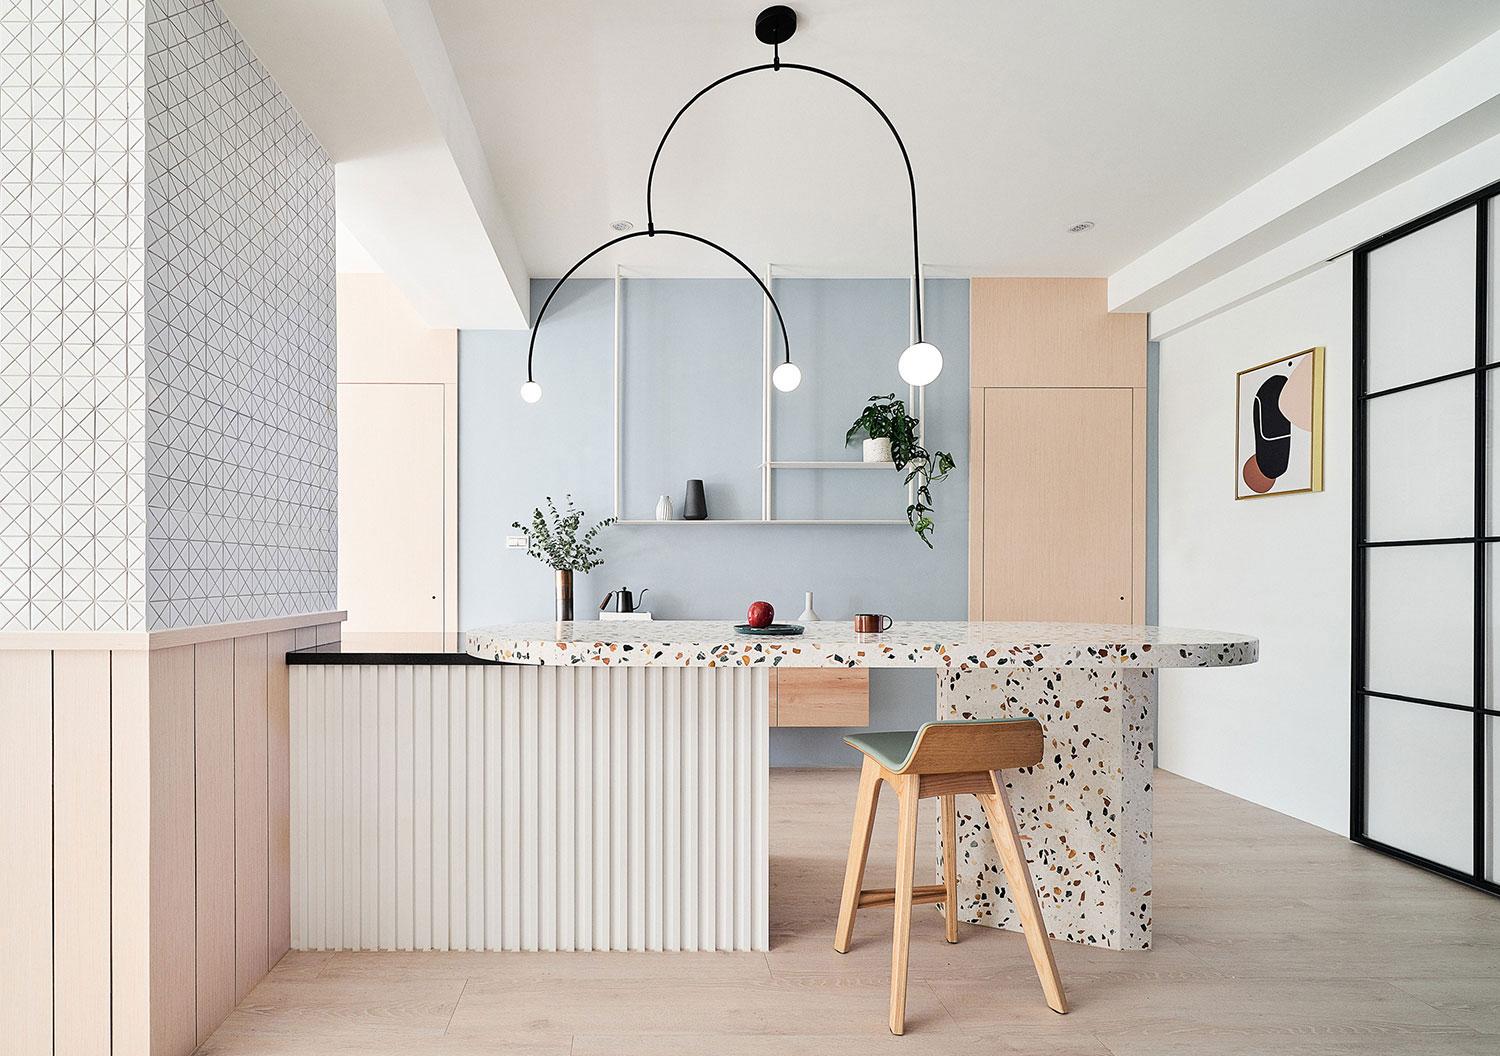 Step Inside a Whimsical Taiwan Apartment Inspired by Soft Rainbow Hues